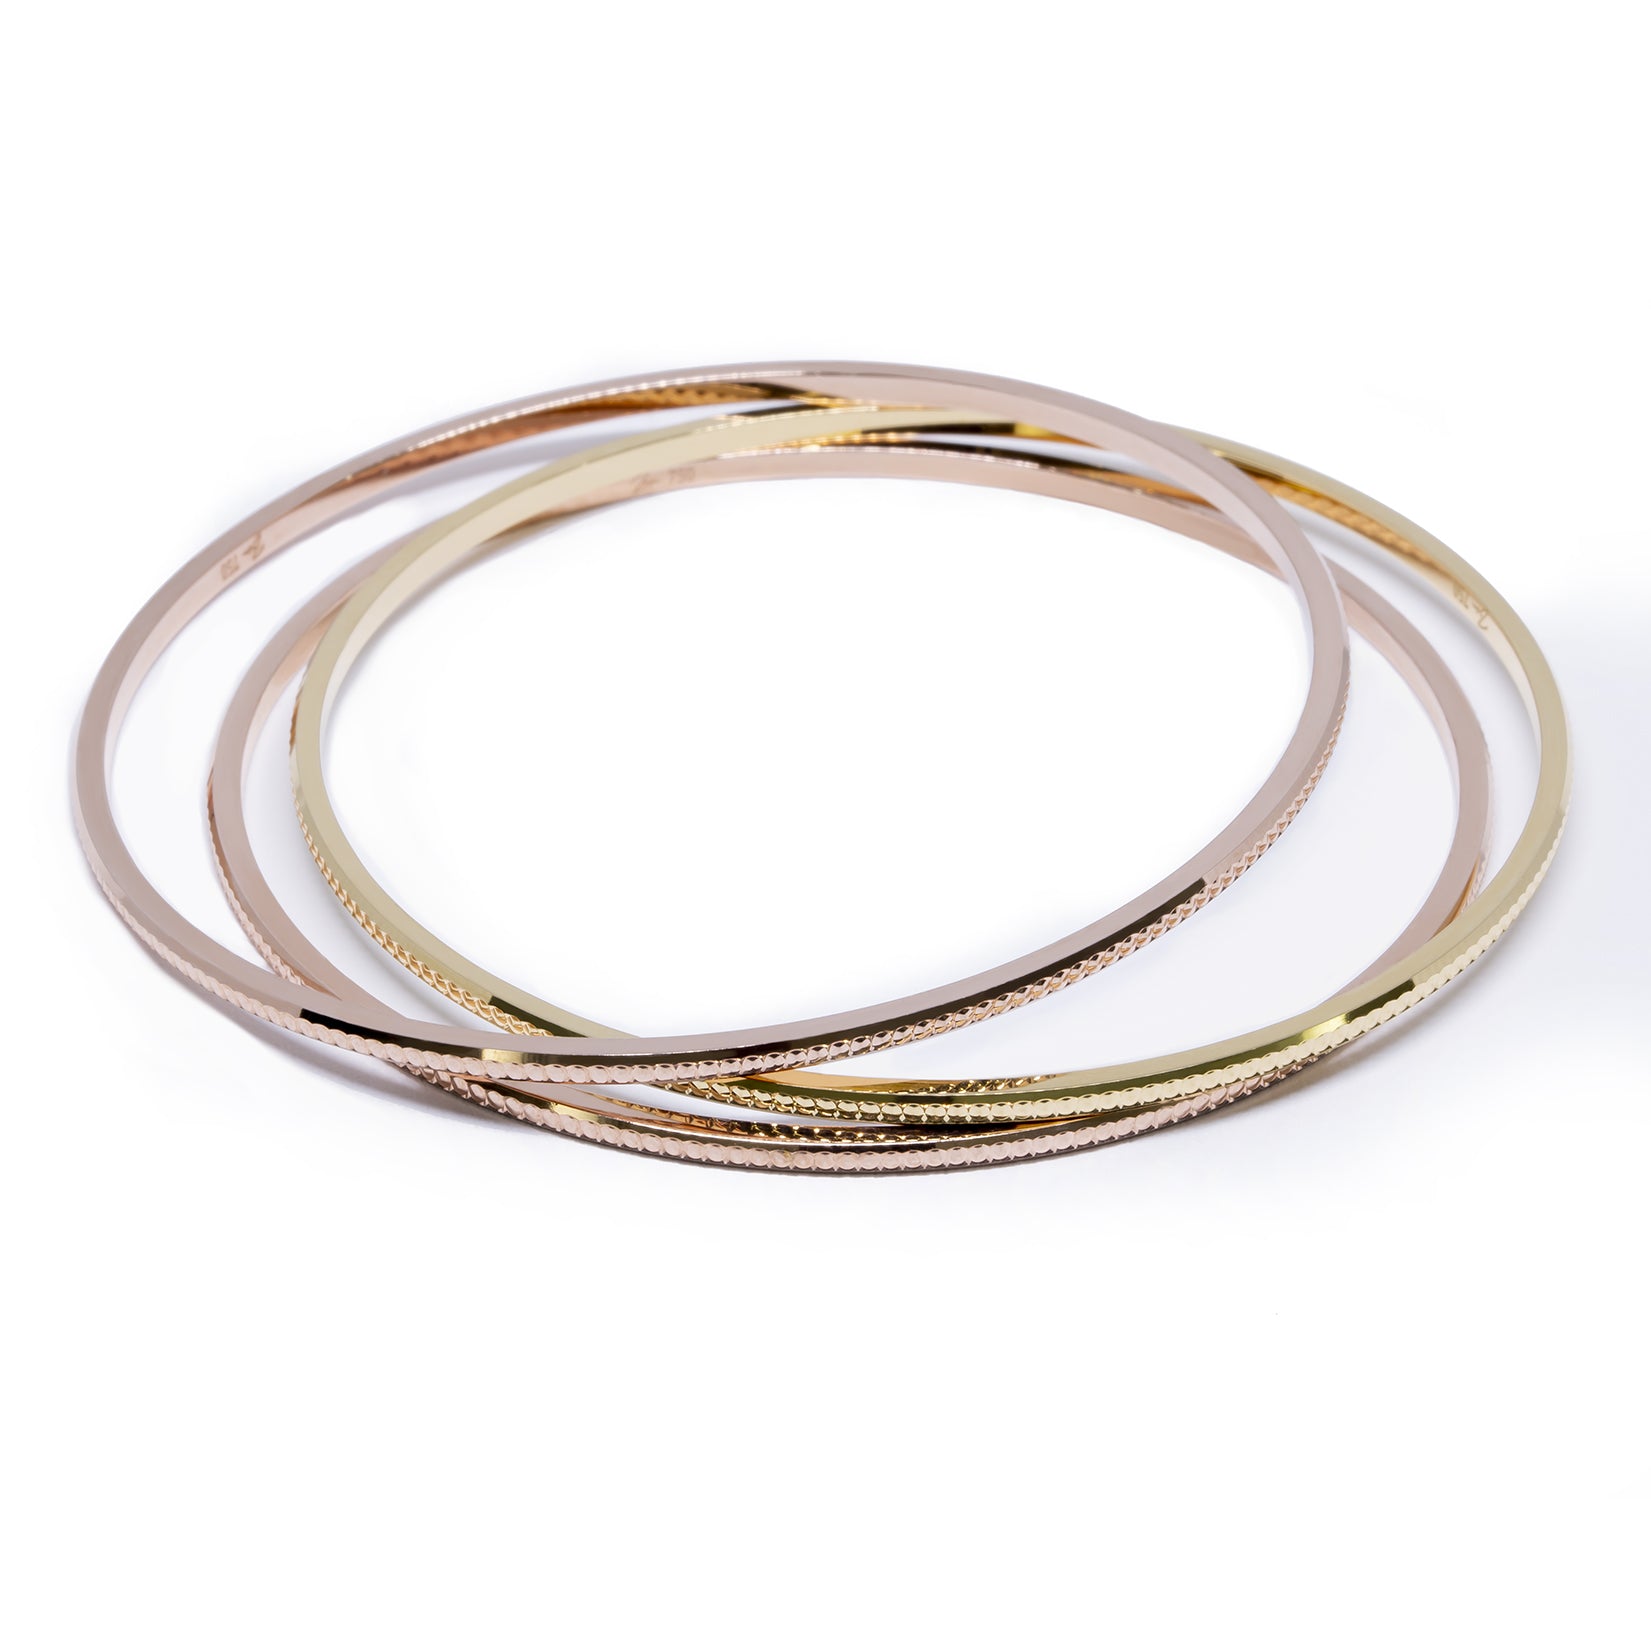 Bangle EARTH IS ROUND 2mm round embossed pattern red gold 18k 750